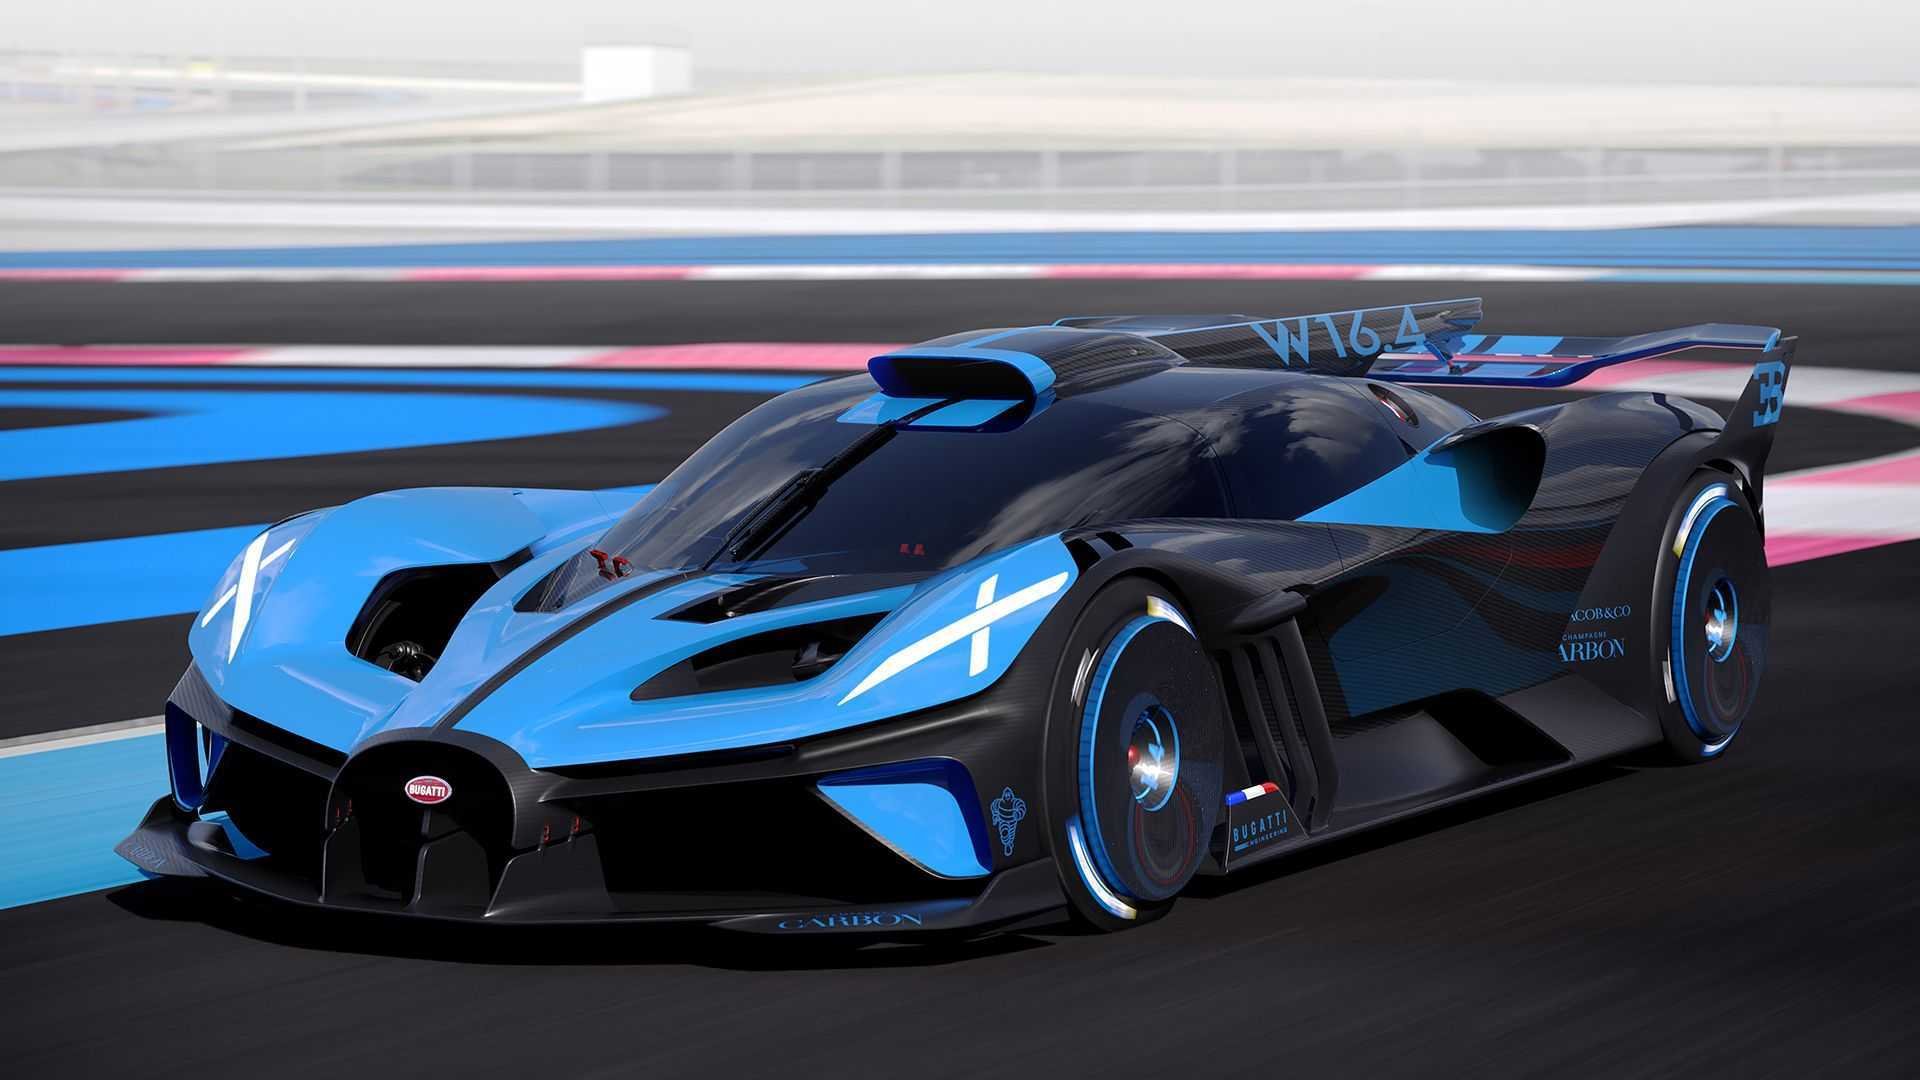 Bugatti Bolide Revealed With 1,825 HP And 311+ MPH Top Speed